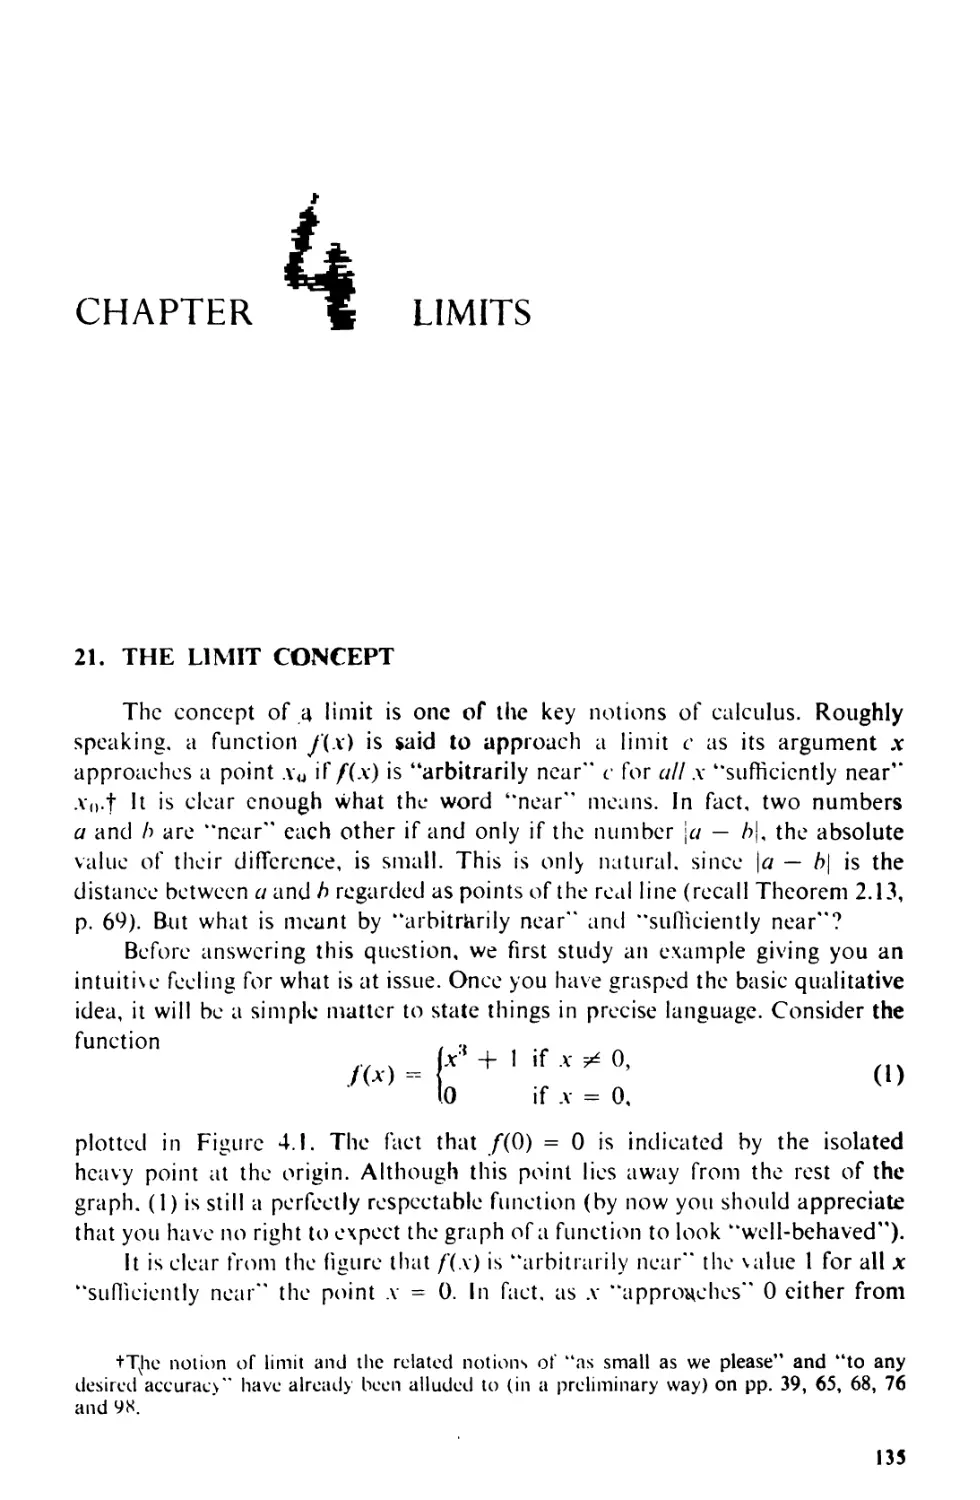 CHAPTER 4 LIMITS